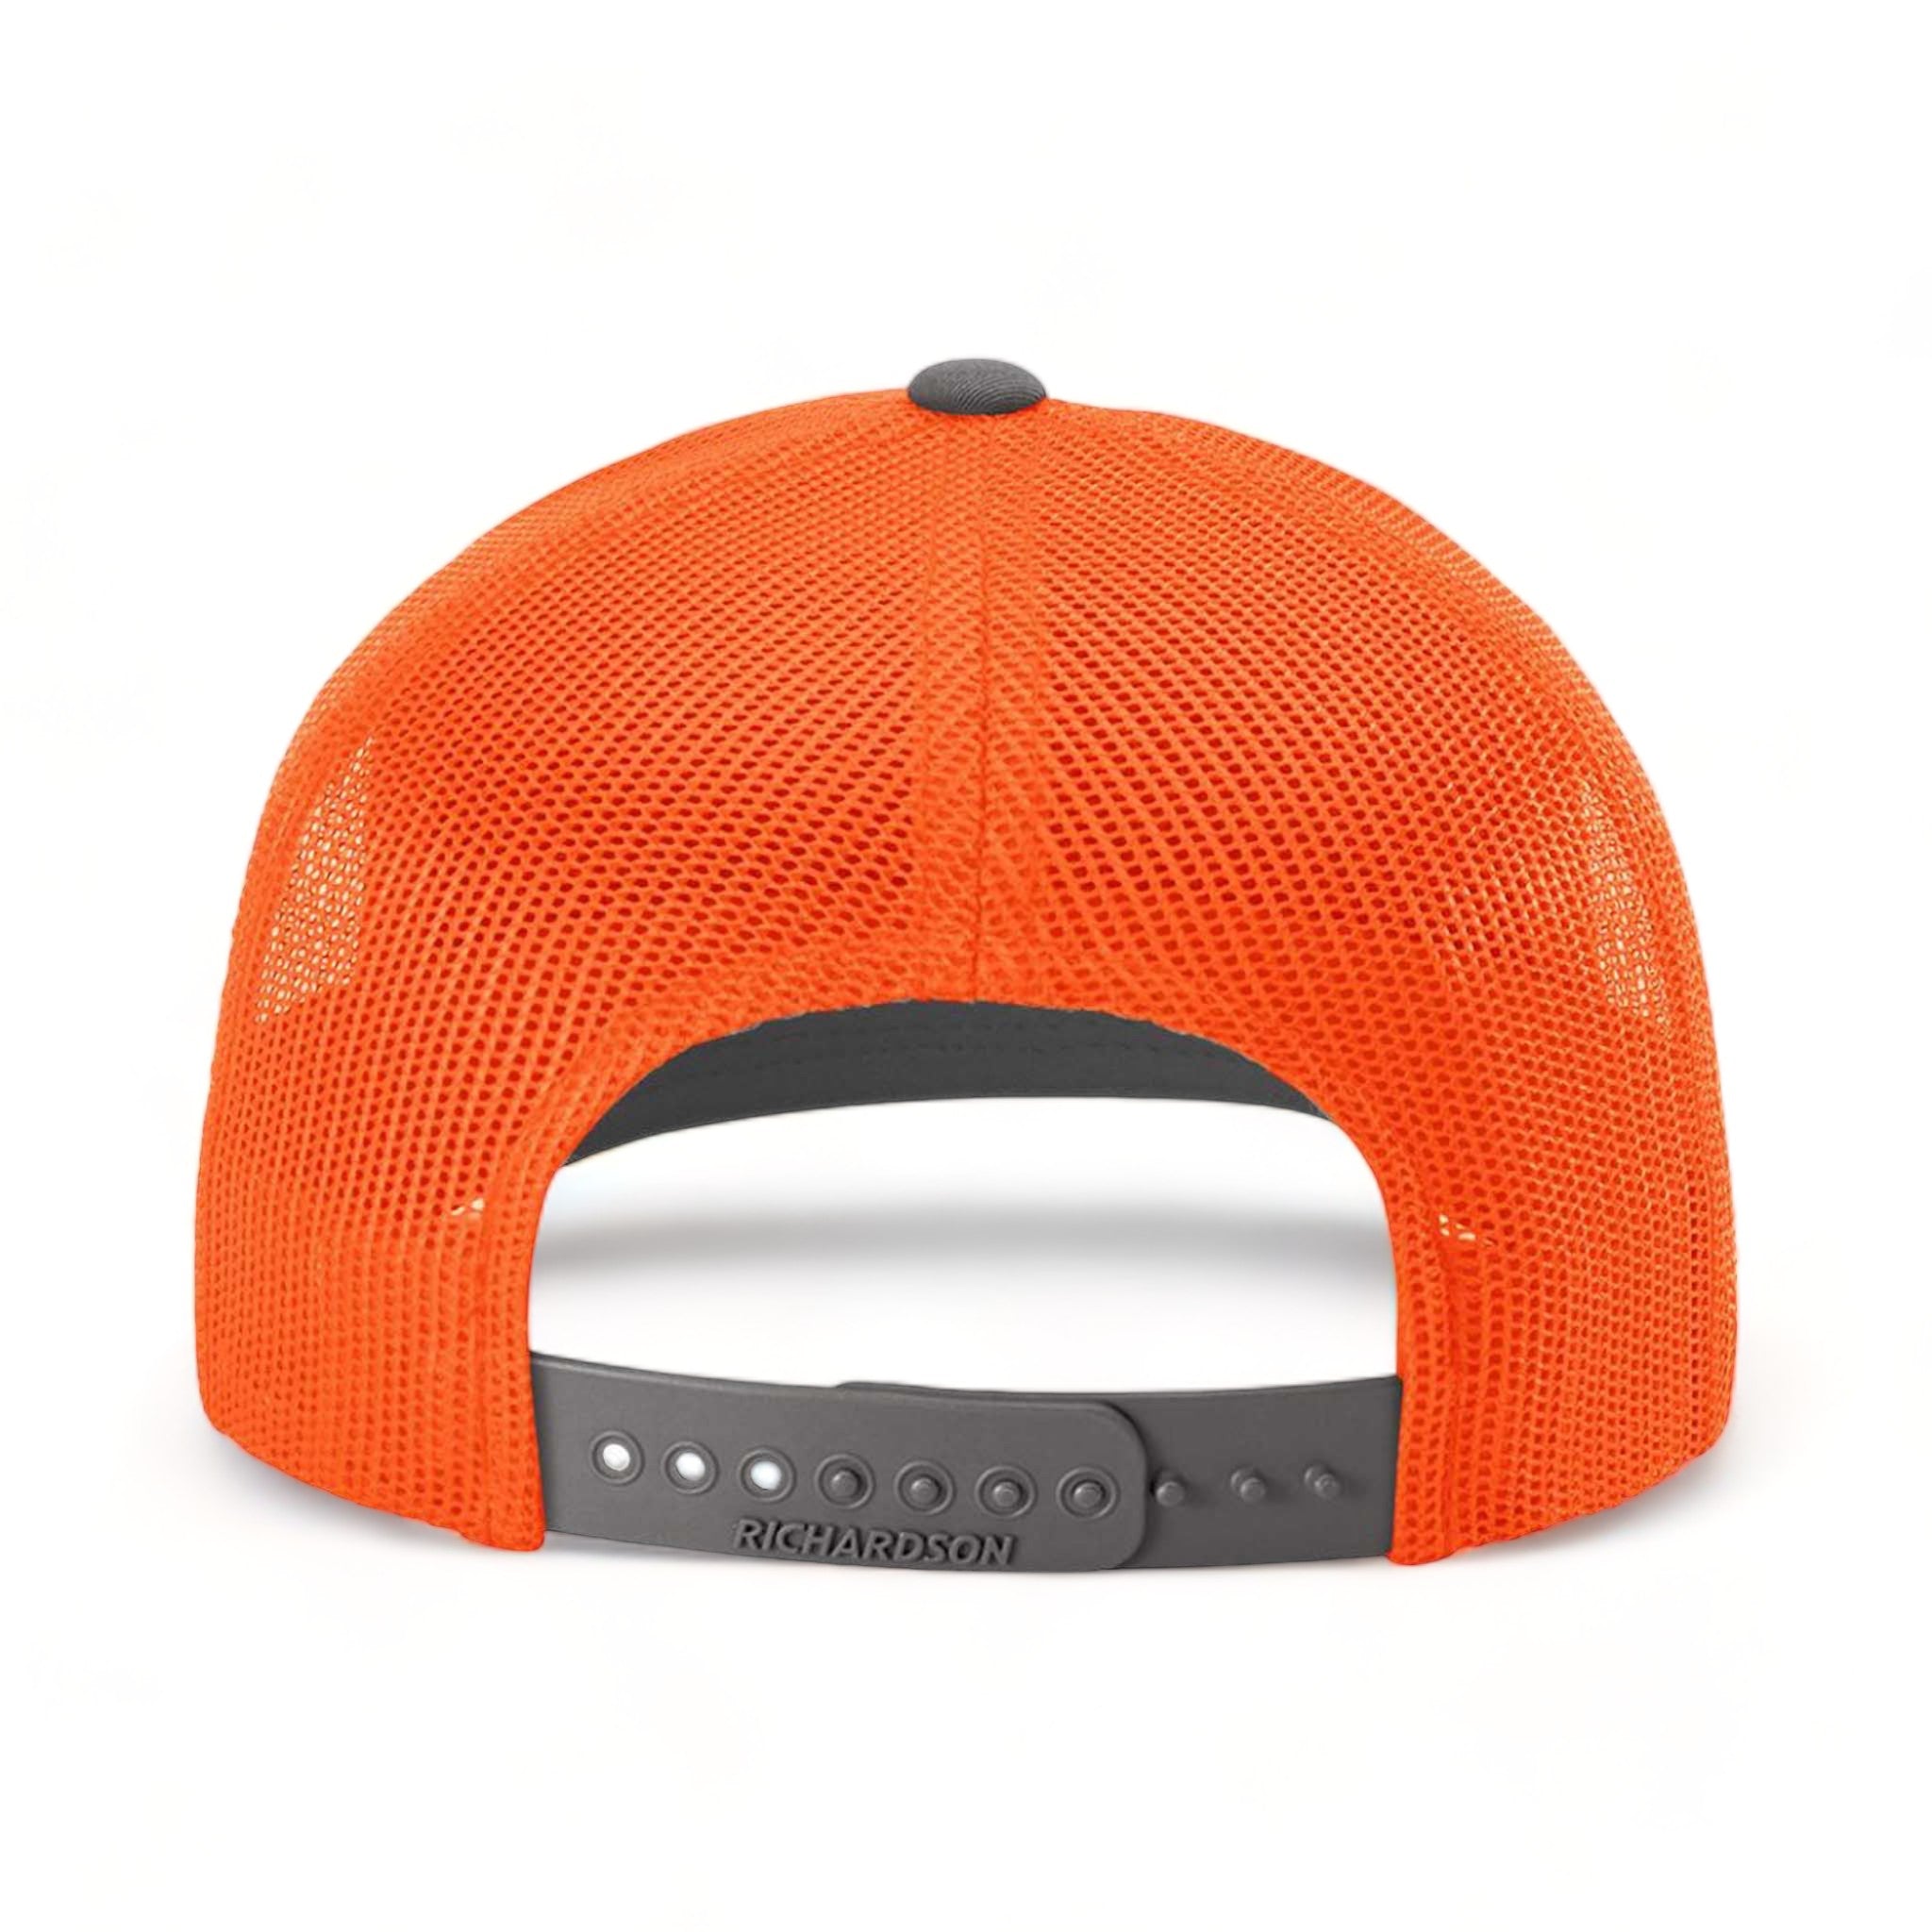 Back view of Richardson 112 custom hat in charcoal and neon orange